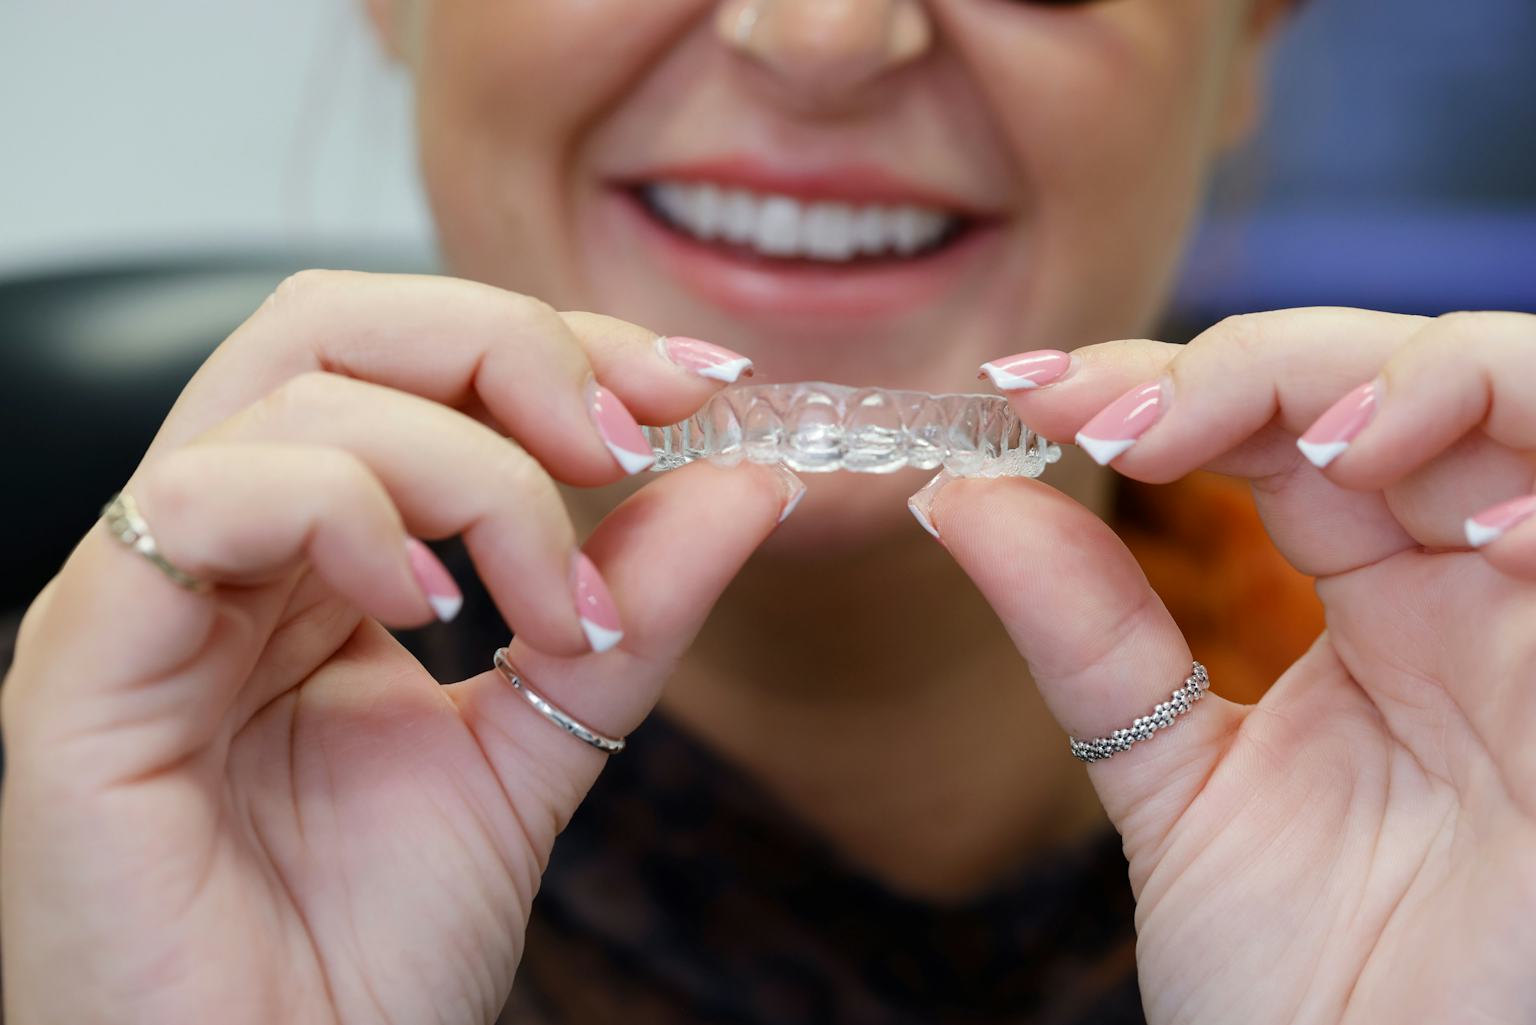 An orthodontic patient holds an Invisalign clear aligner